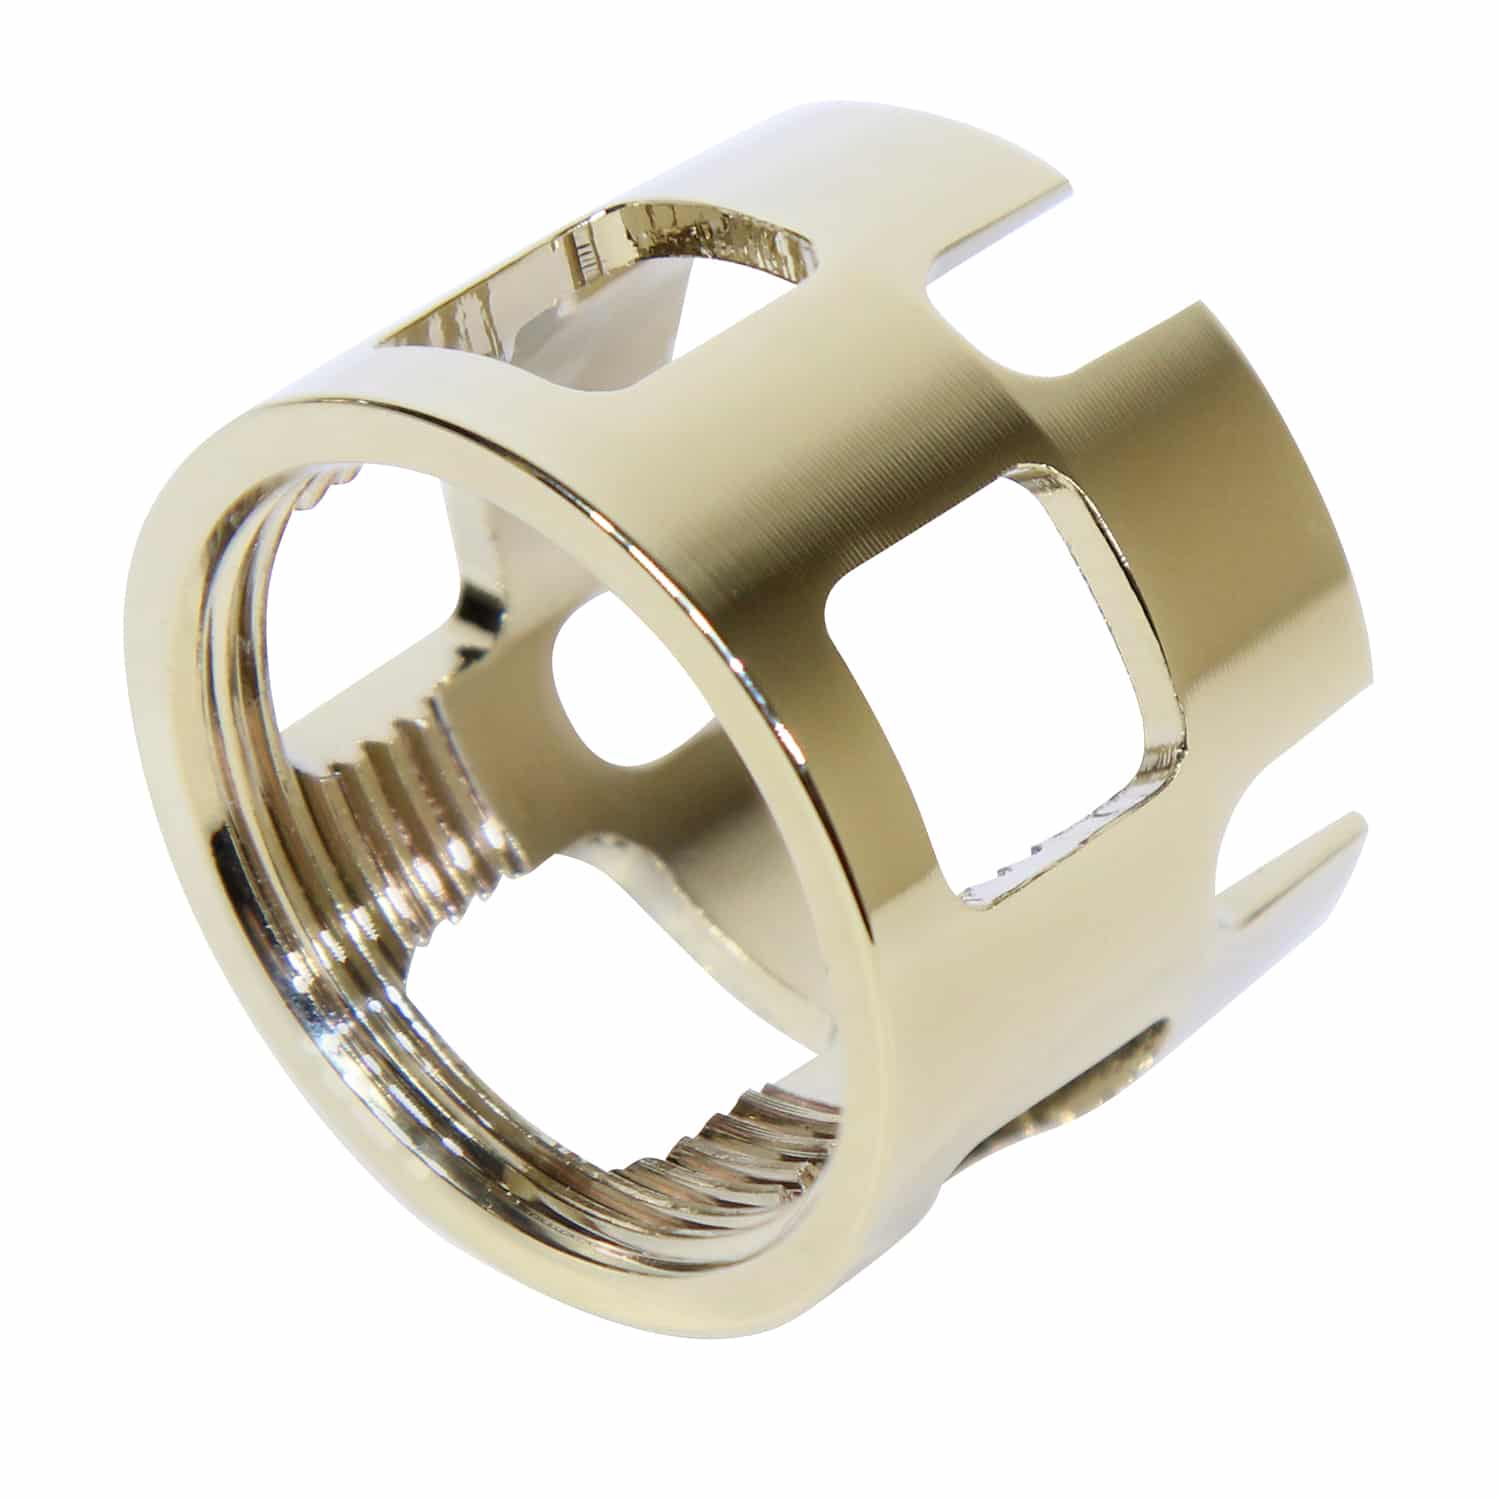 AR 15 Extreme Duty Wide Castle Nut For CarM4 Buffer Tube Gold Plated